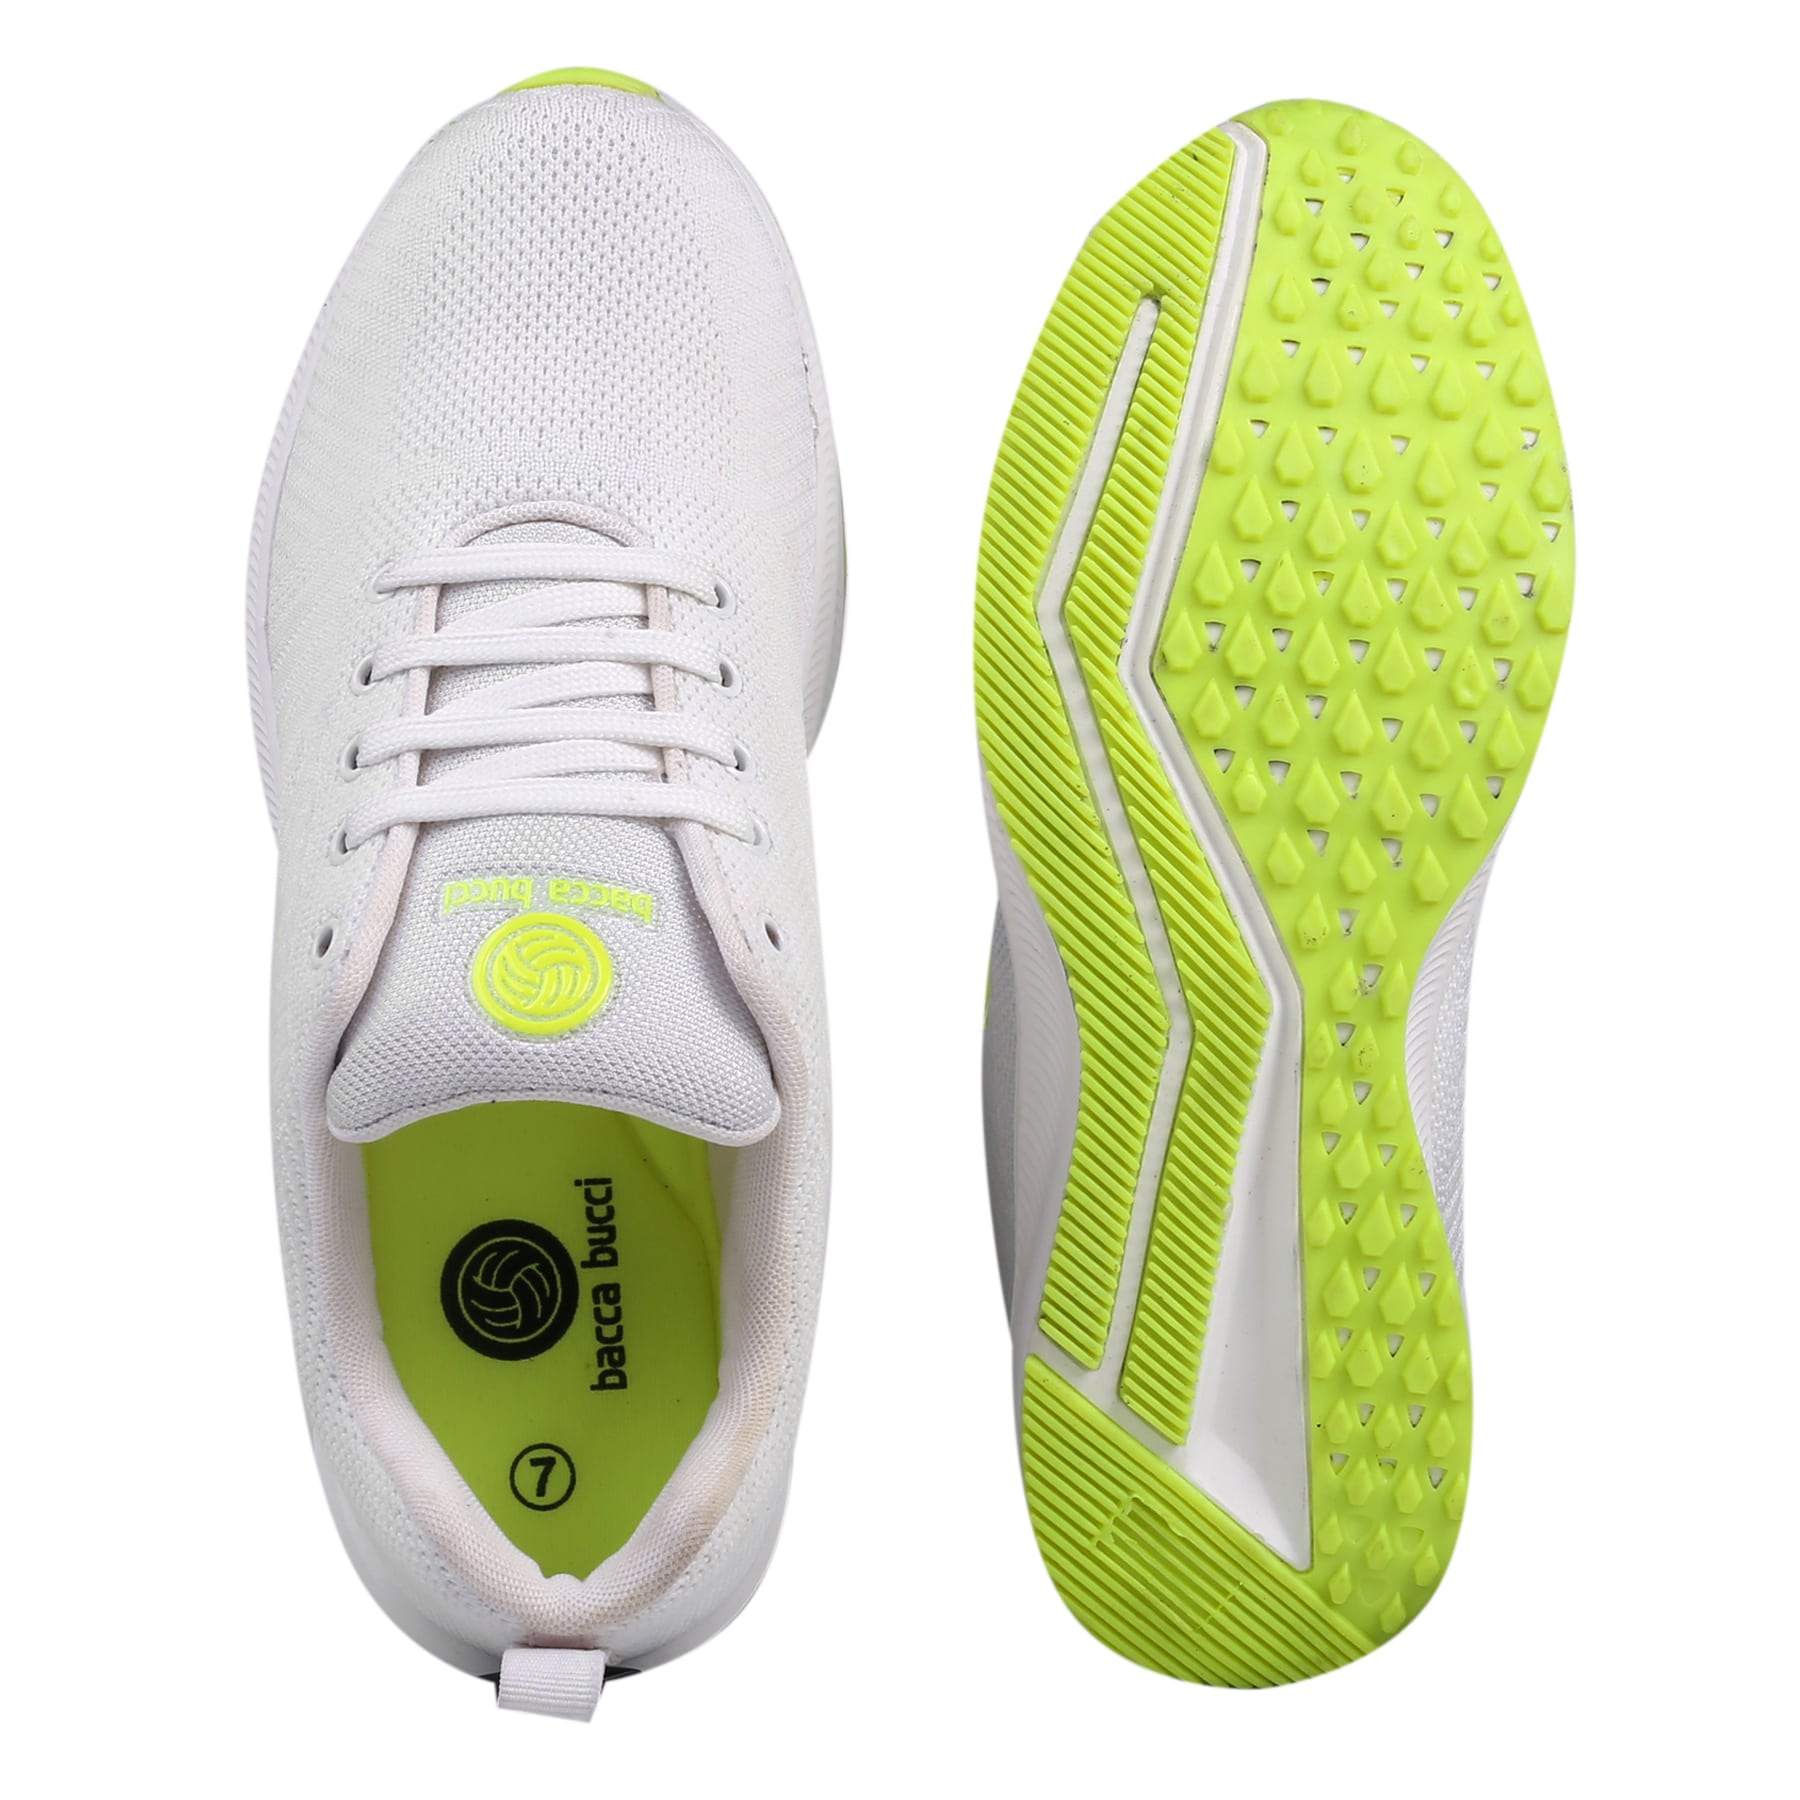 Bacca Bucci PROTON Plus Size Sports Shoes with Shock Absorption Lining & Whole-Woven Upper